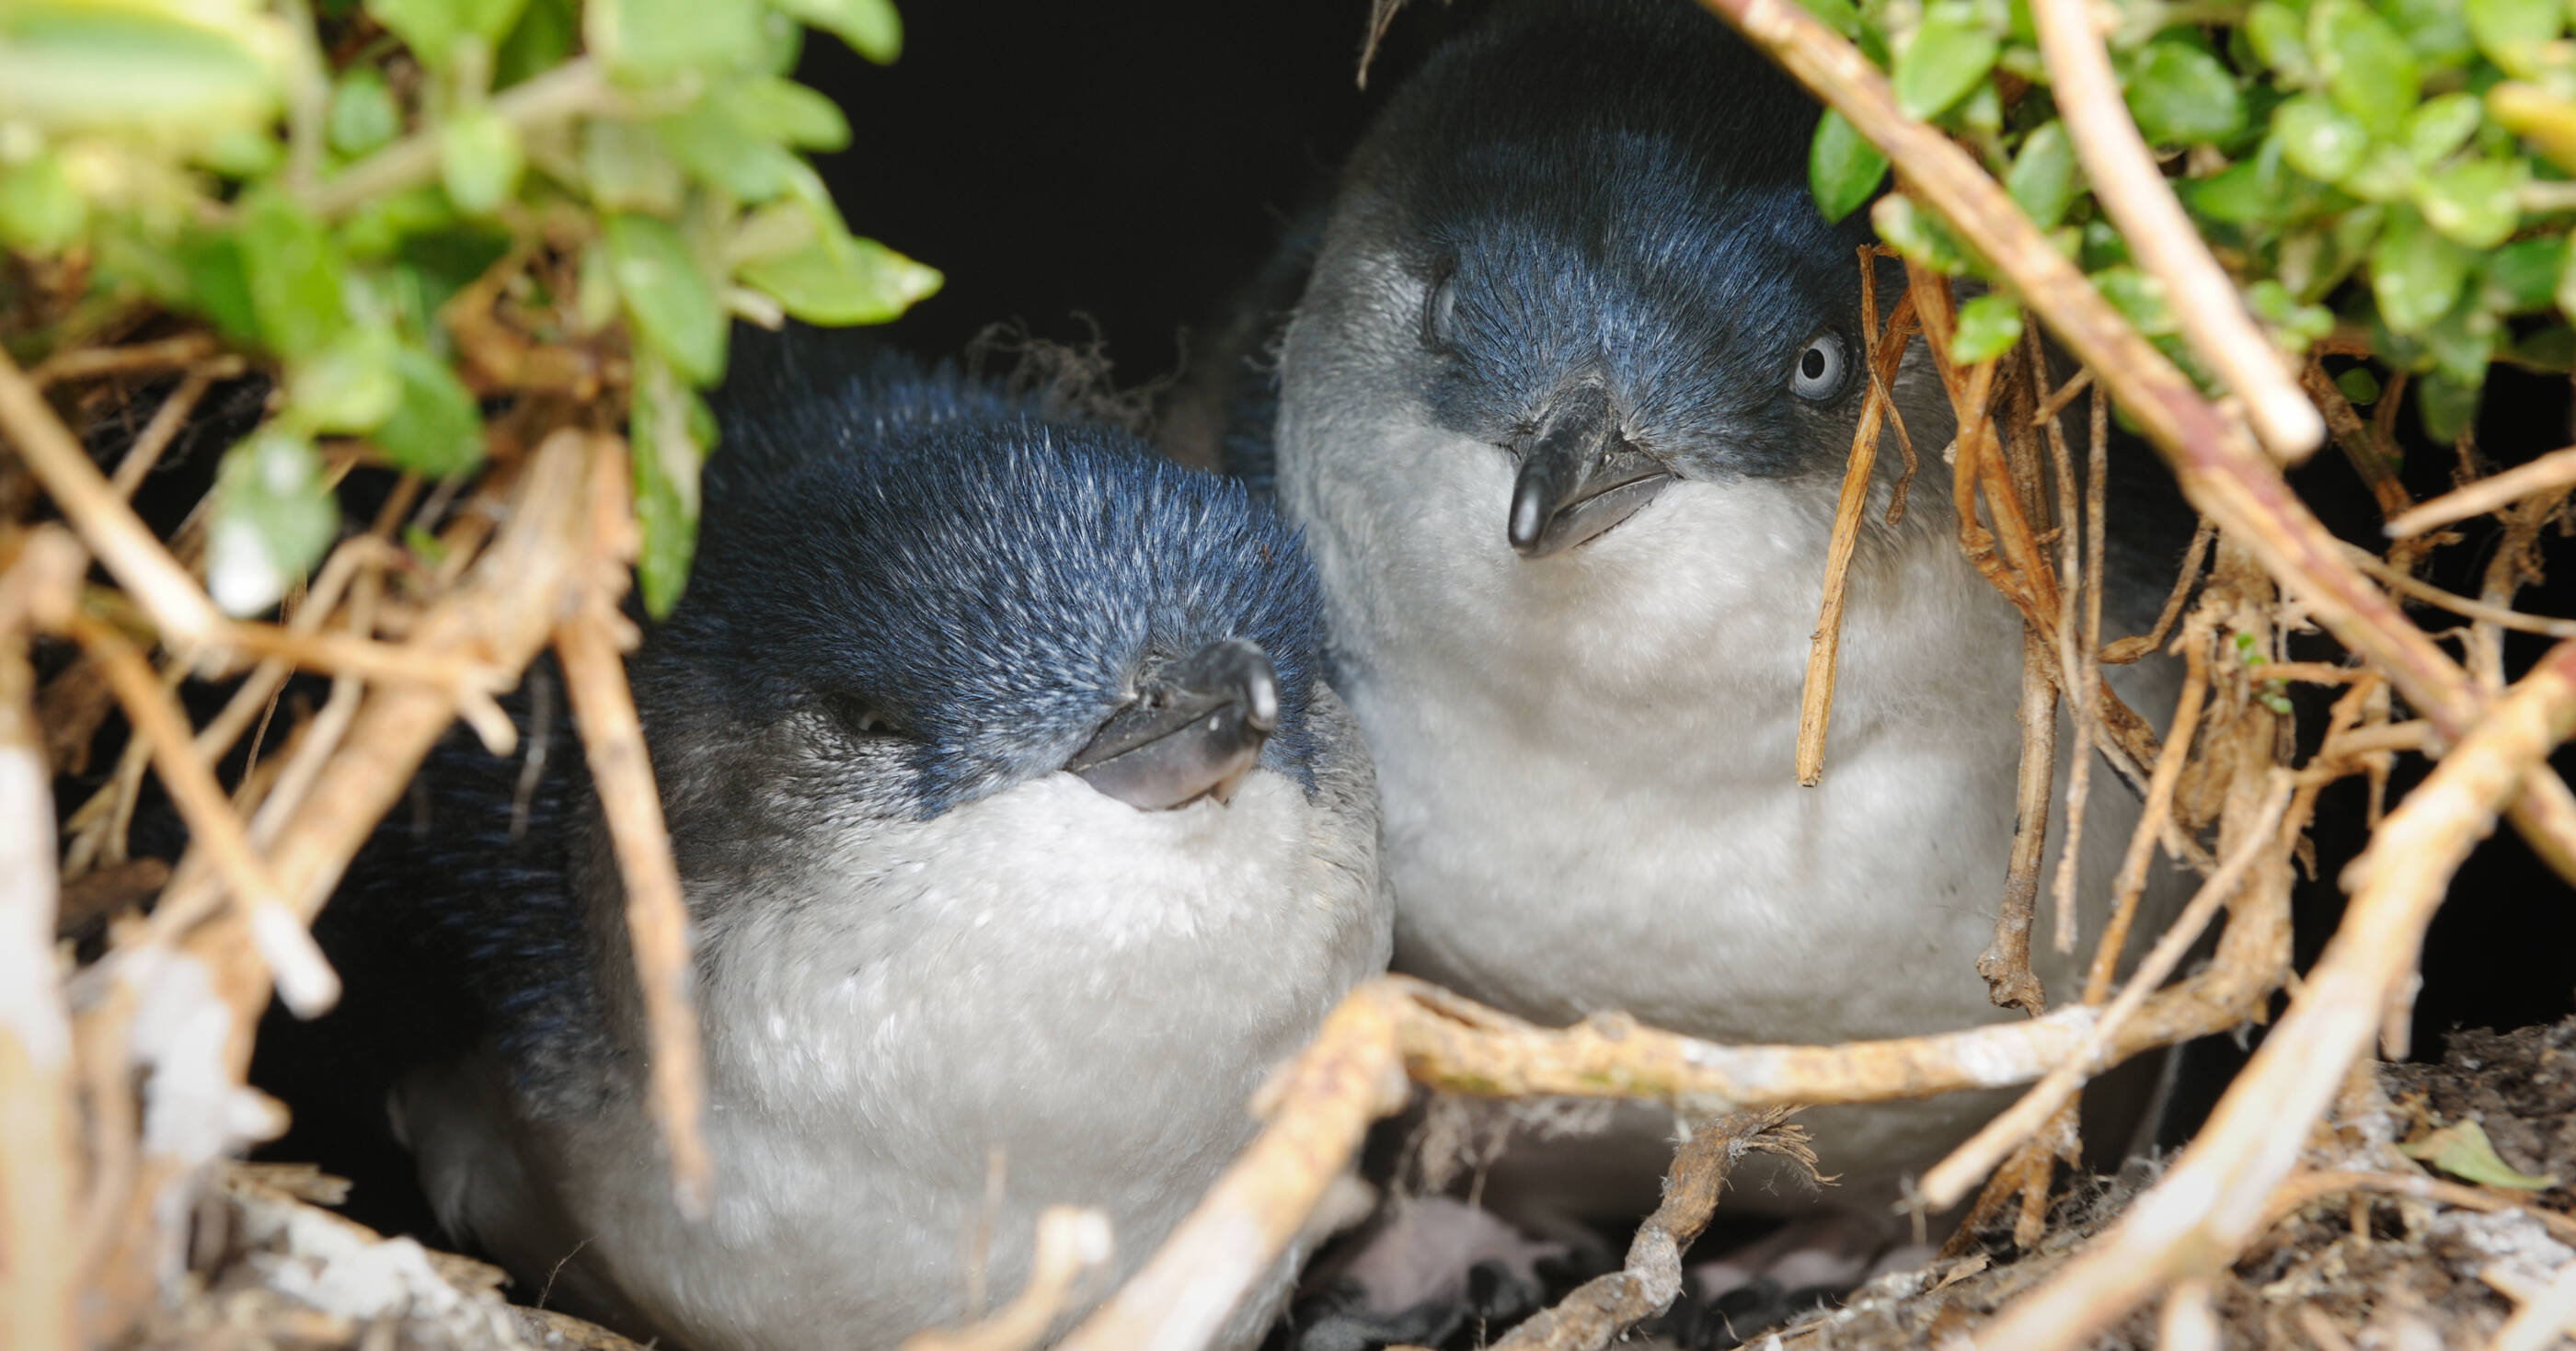 Image Little penguins breeding in their nest in wildlife. The little penguin is the world’s smallest penguin species and the only penguin permanently found in Australia.